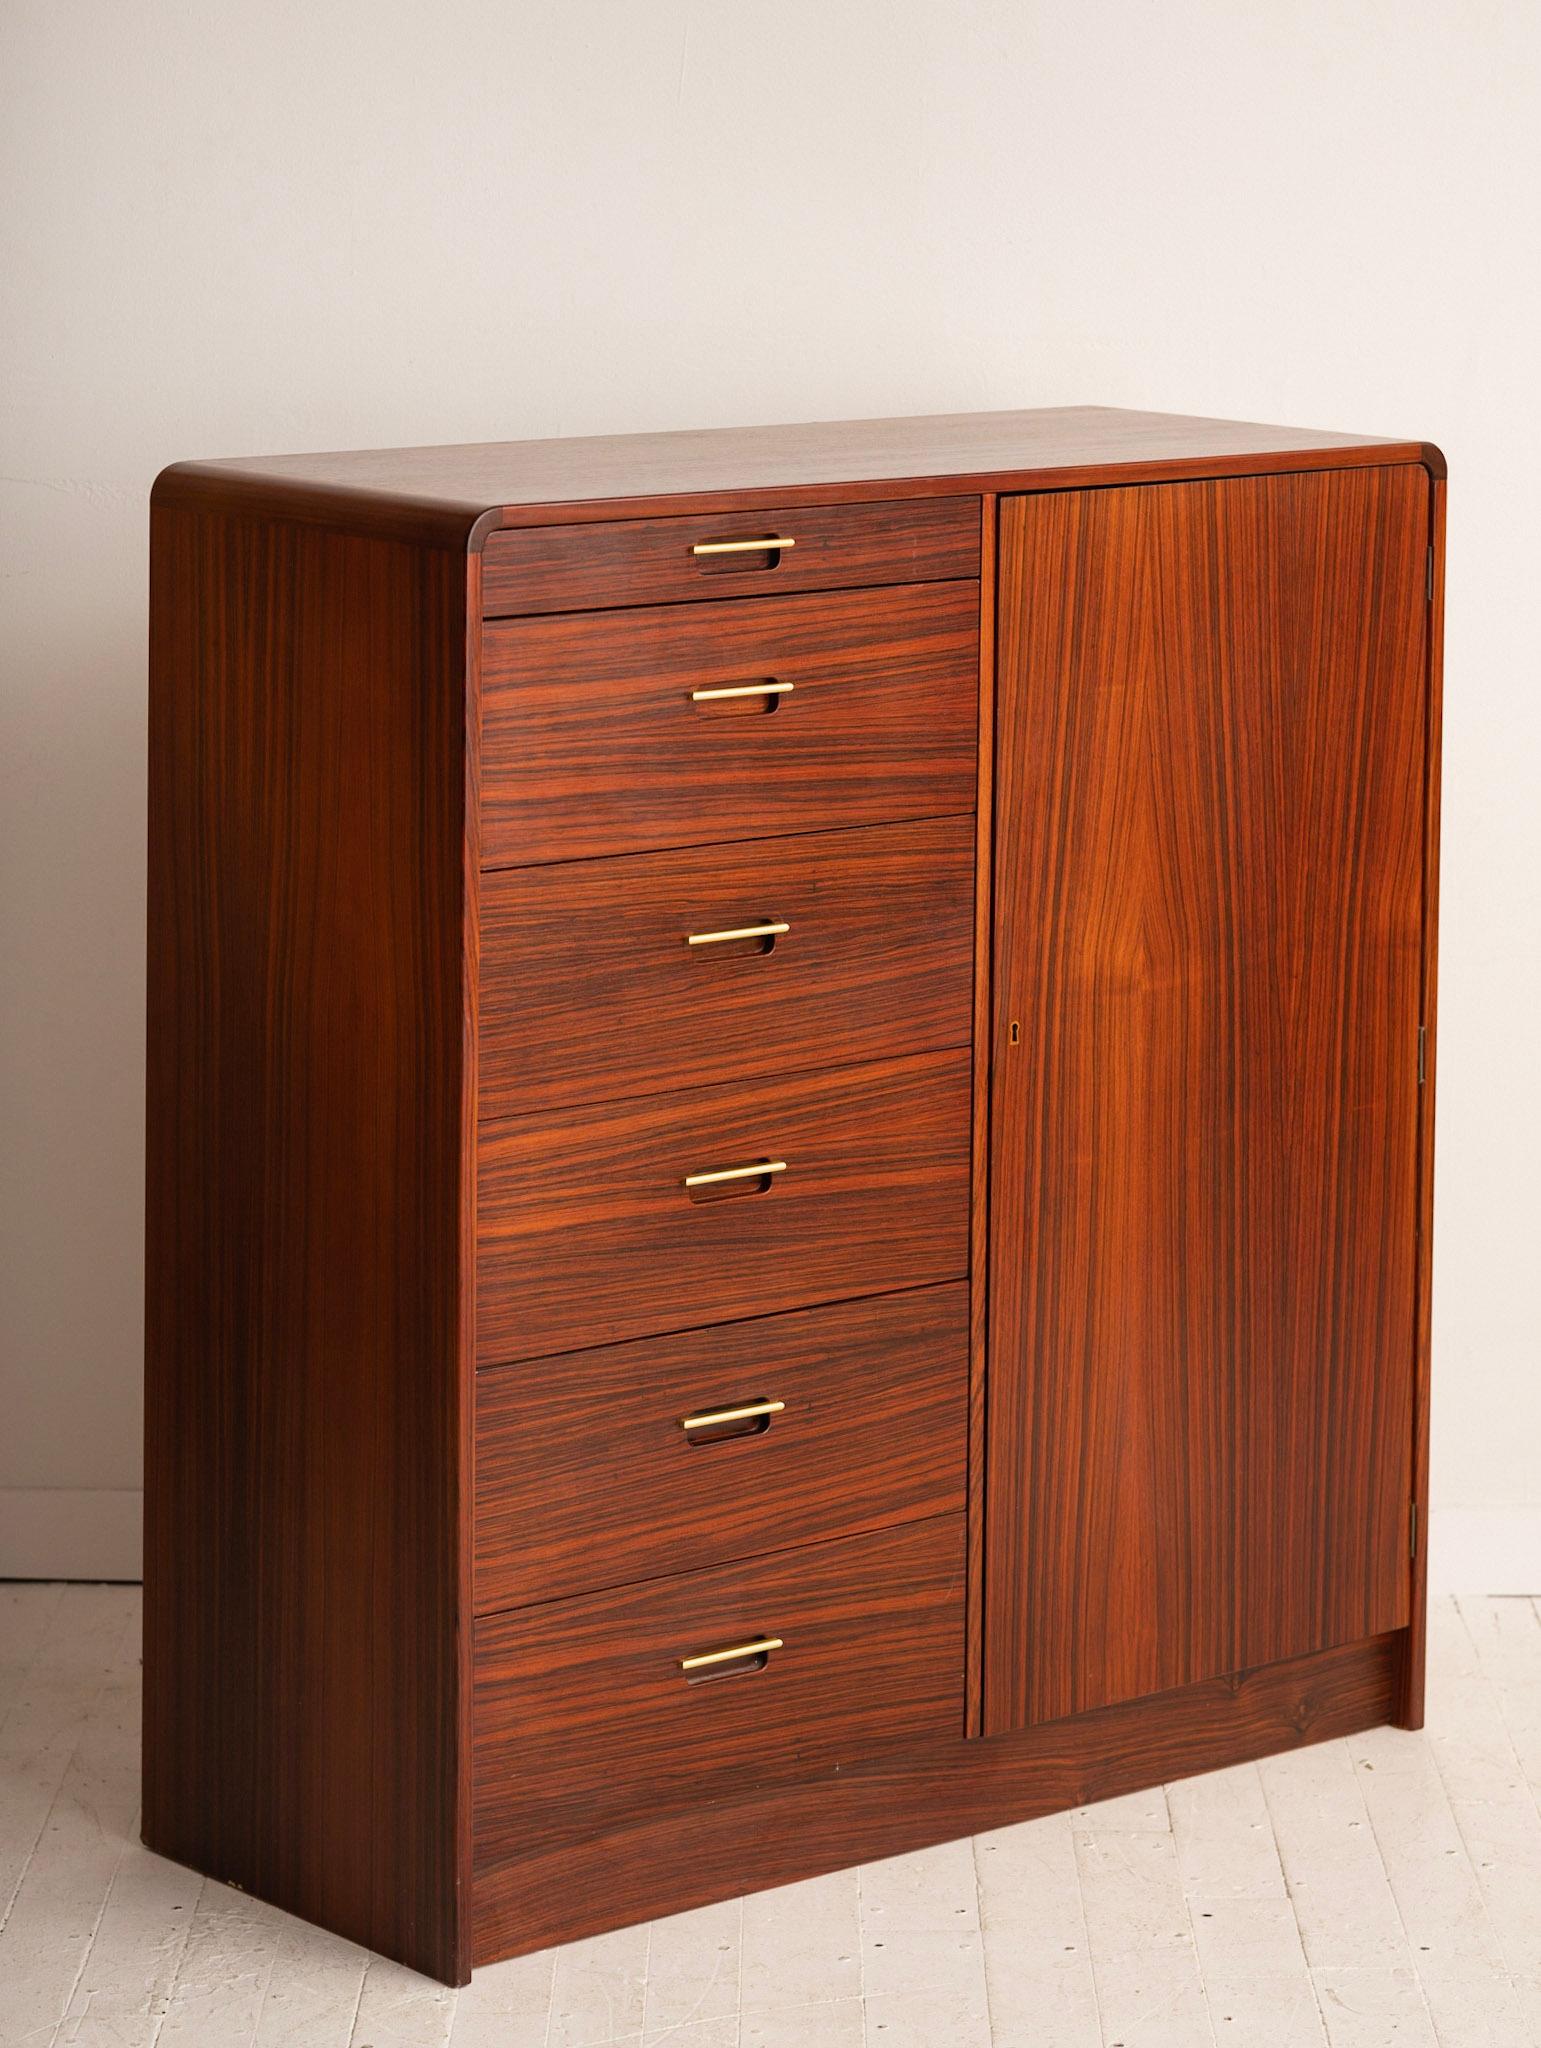 Danish rosewood chest of drawers. 6 left side drawers with brass pulls. Lockable right door opens to reveal 6 additional drawers. Key included. Unknown maker. Stamped 